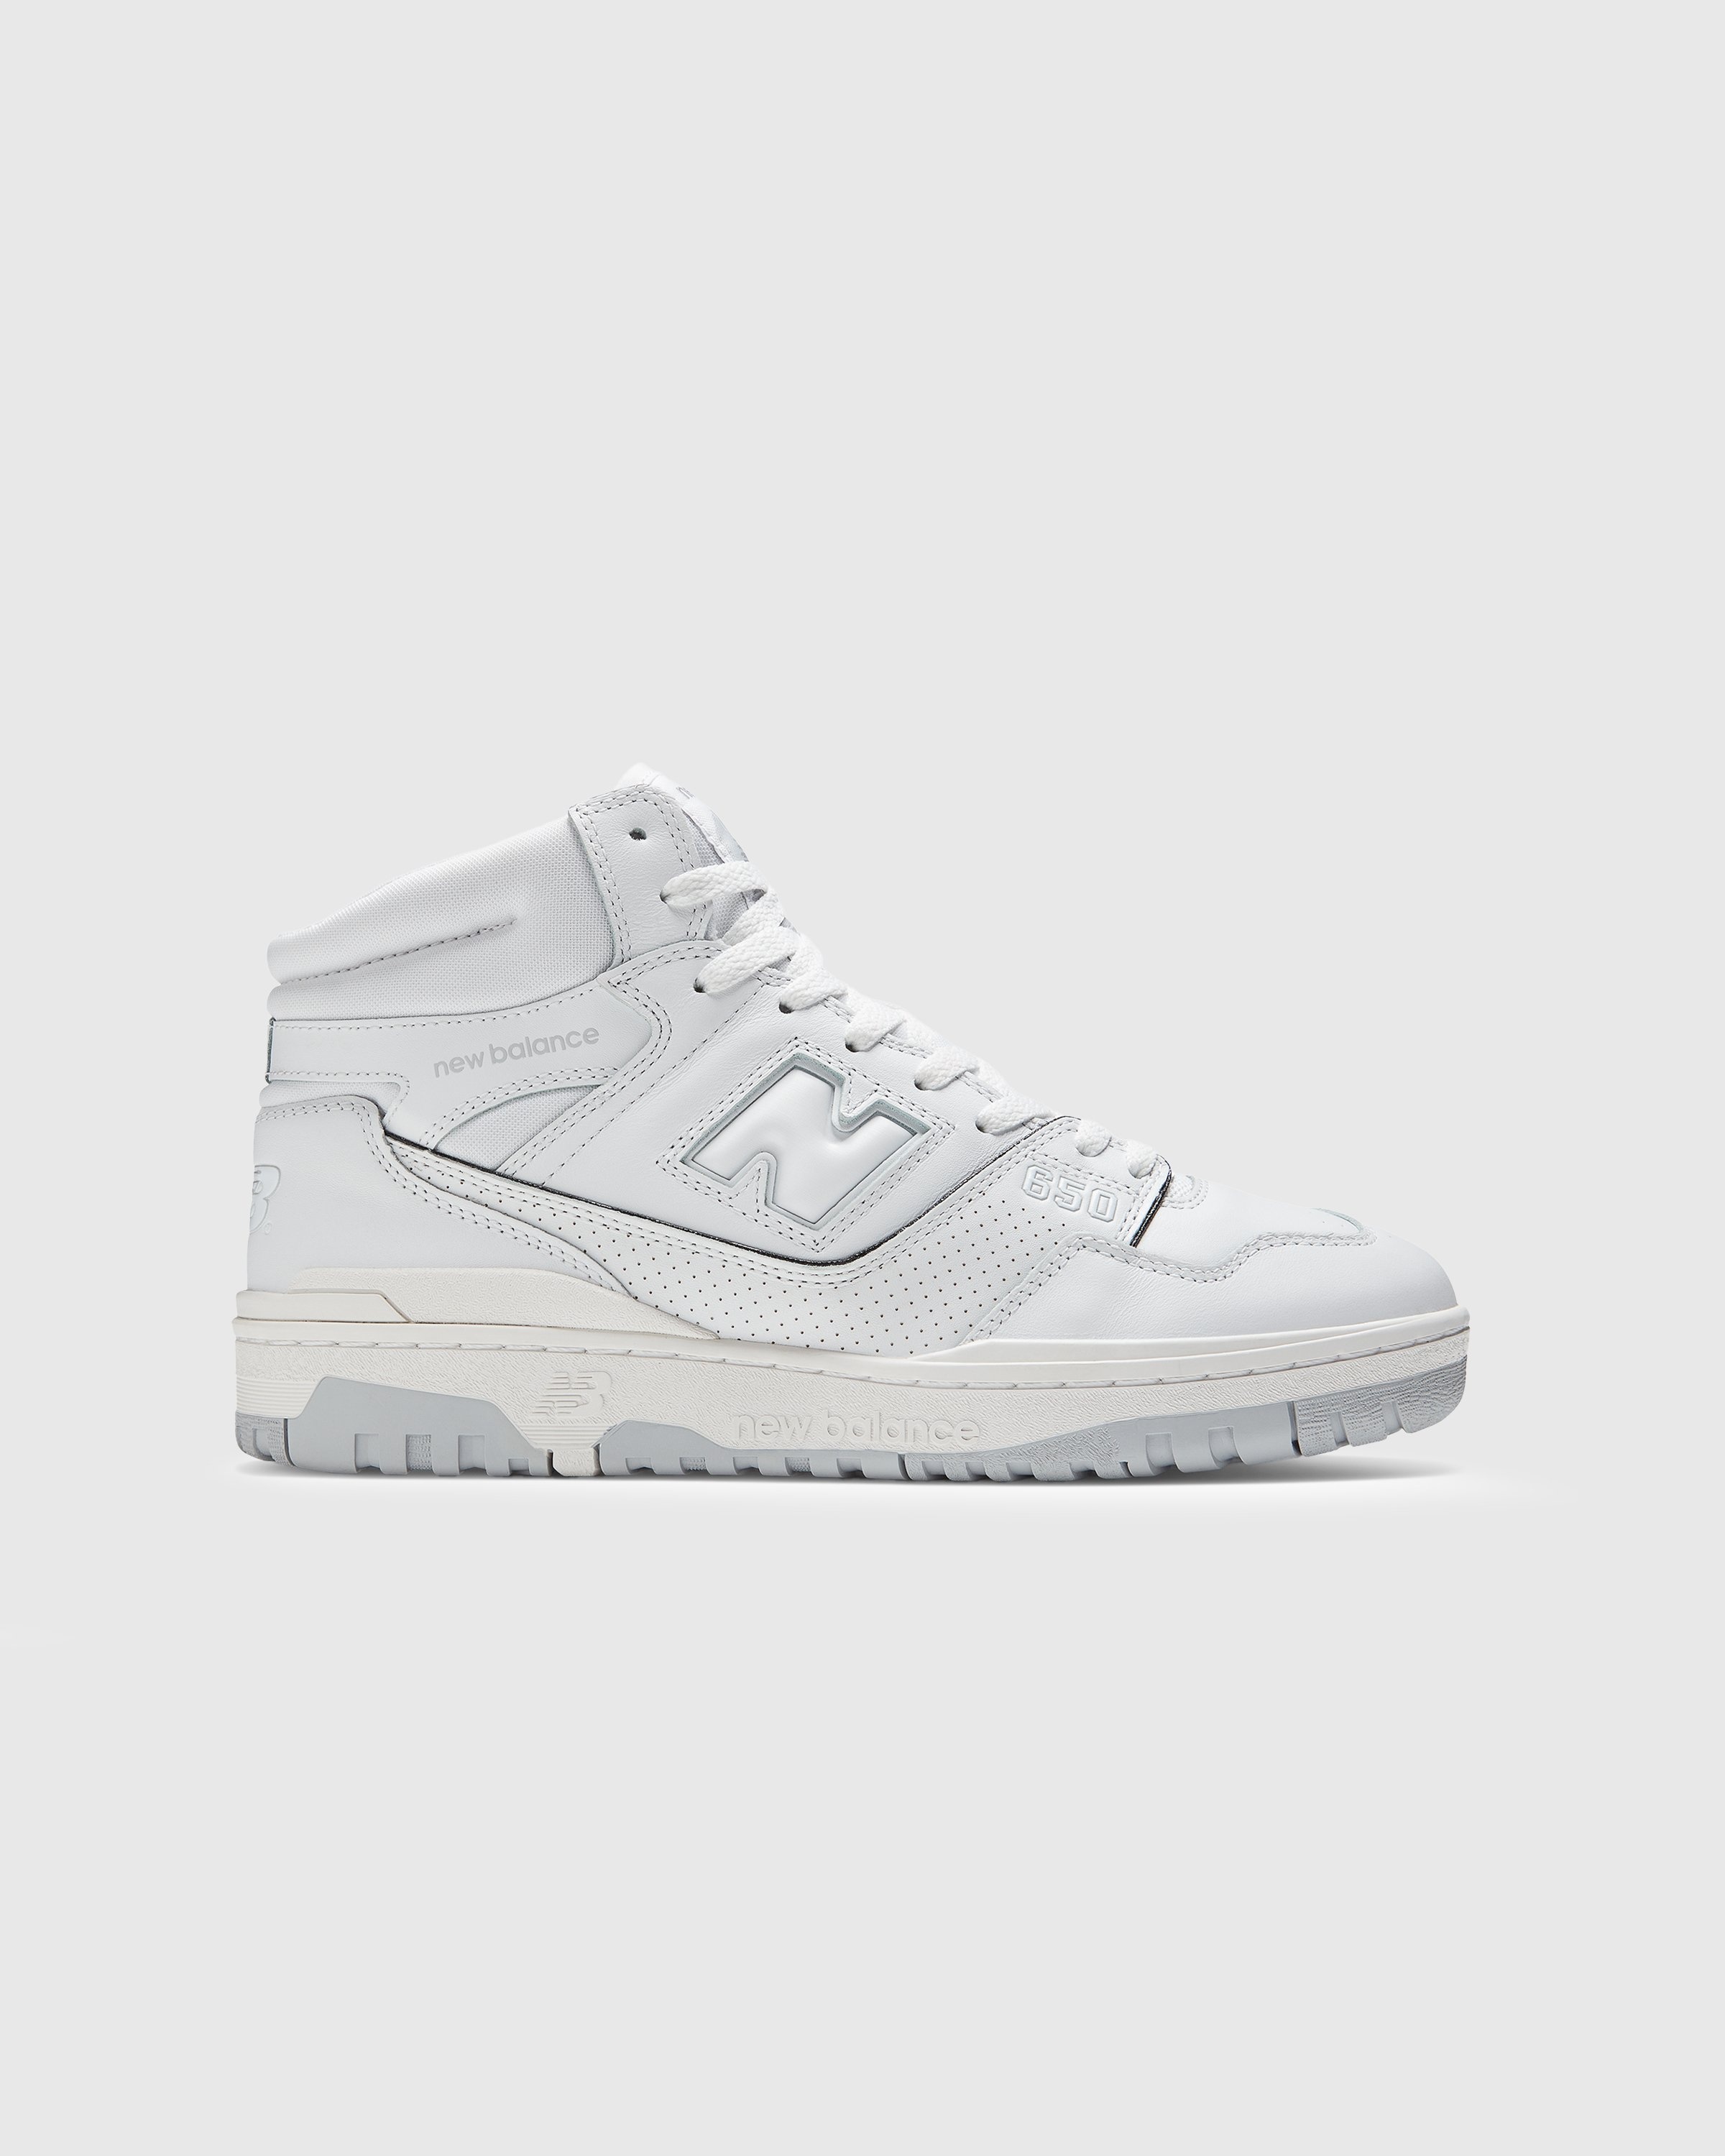 New Balance – BB 650 RWW White  - High Top Sneakers - White - Image 1